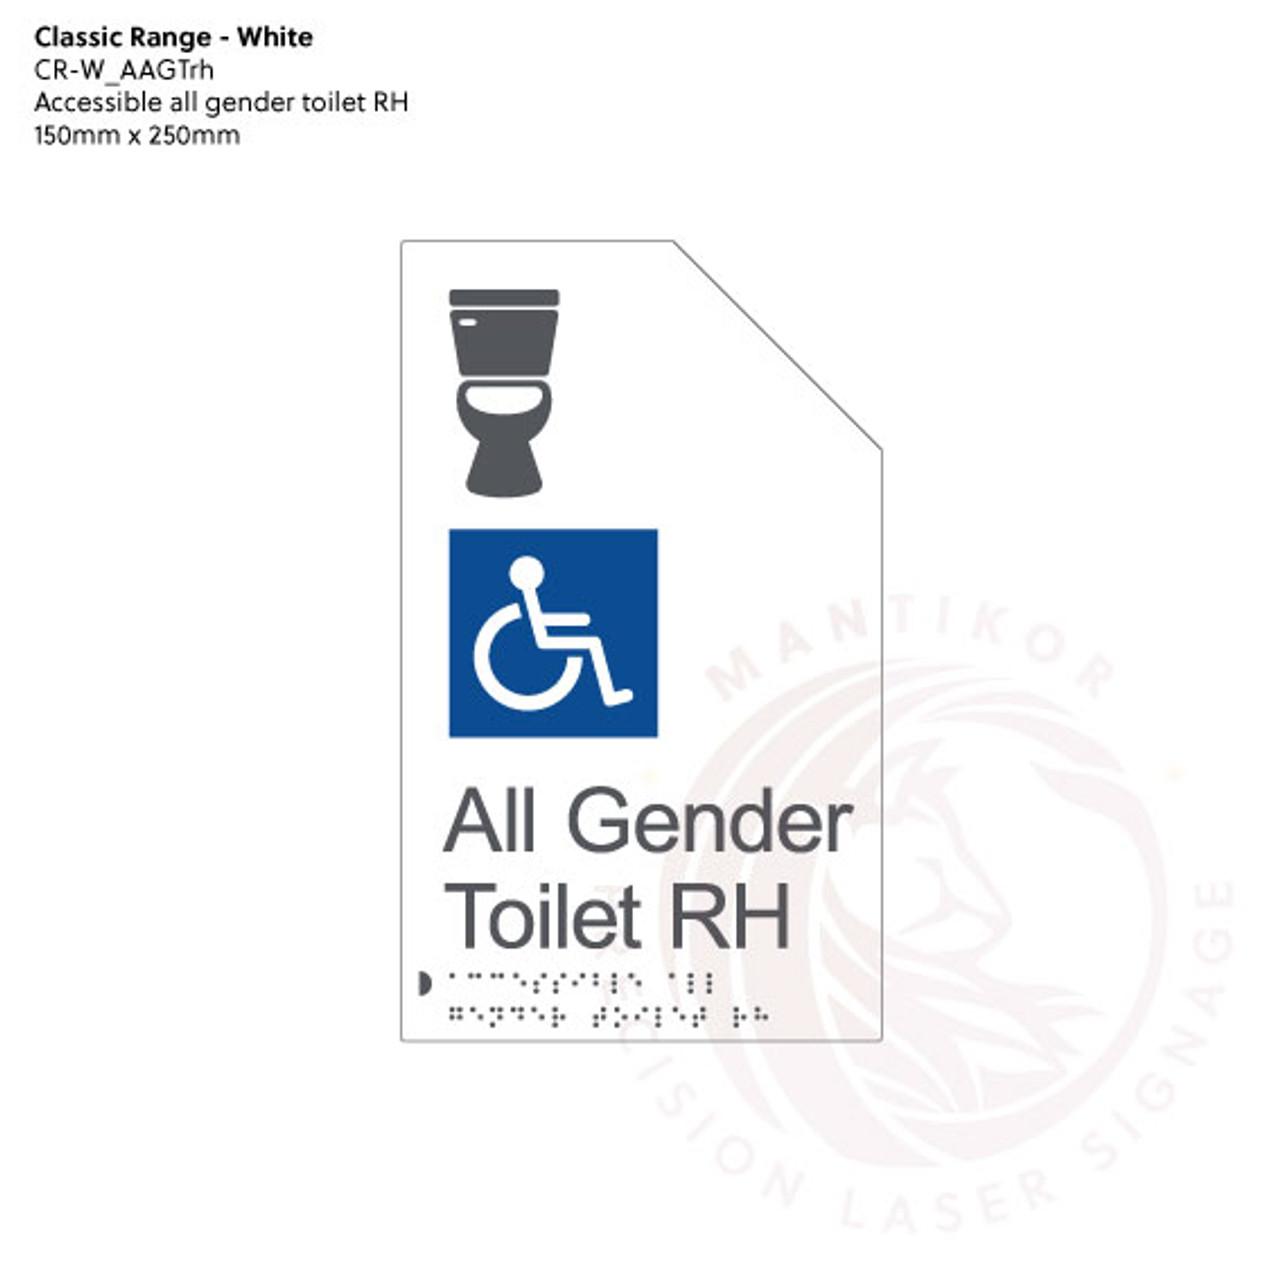 Classic Range - Matte White Acrylic Braille Signs - Accessible All Gender Toilet RH